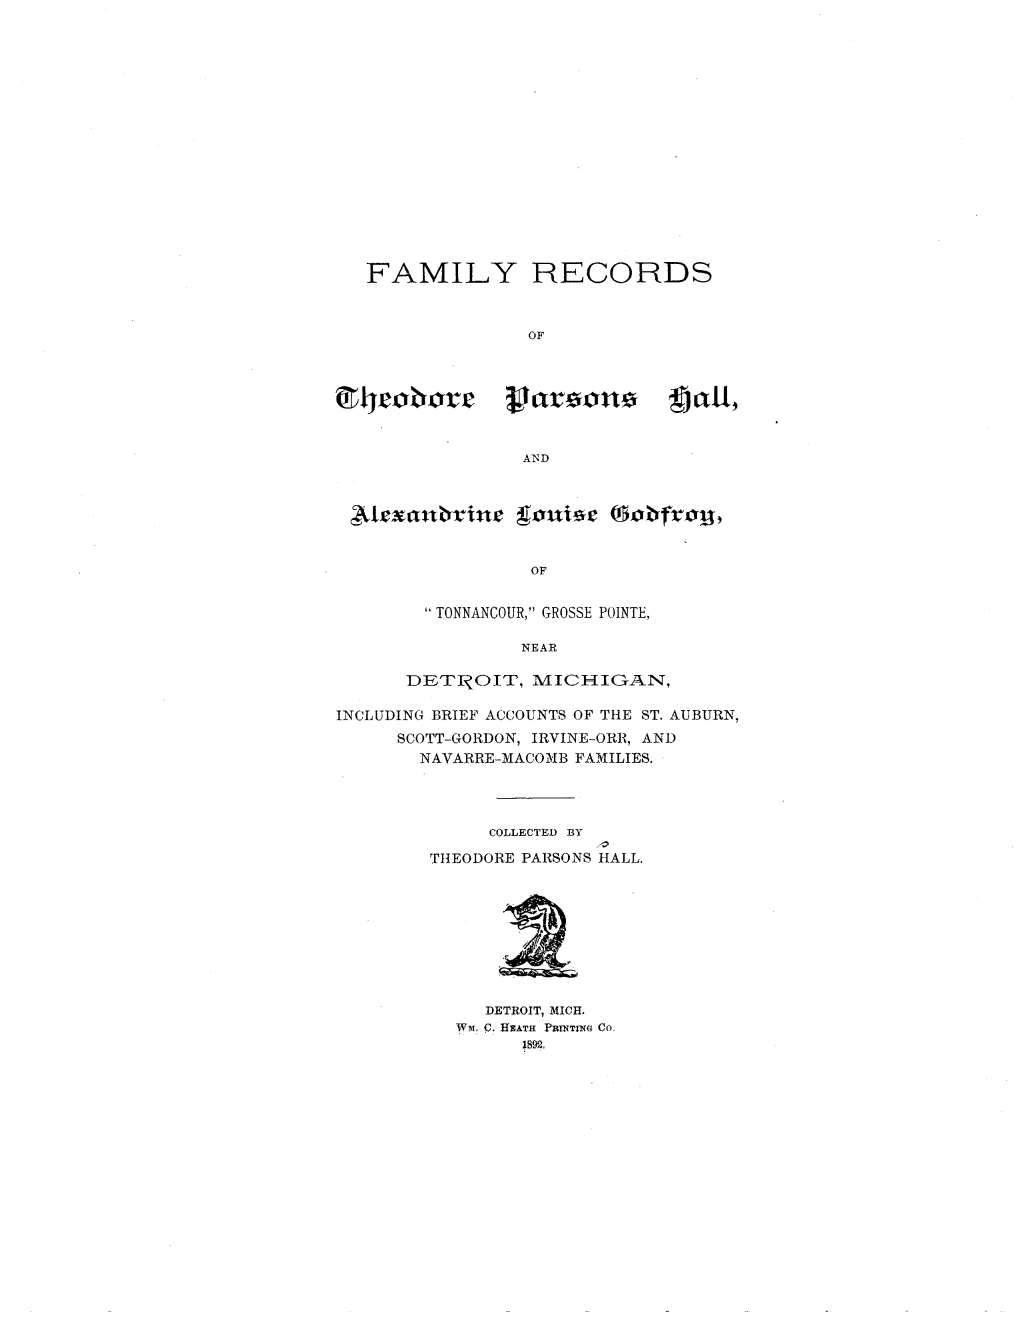 Family Records of Theodore Parsons Hall and Alexandrine Louise Godfroy